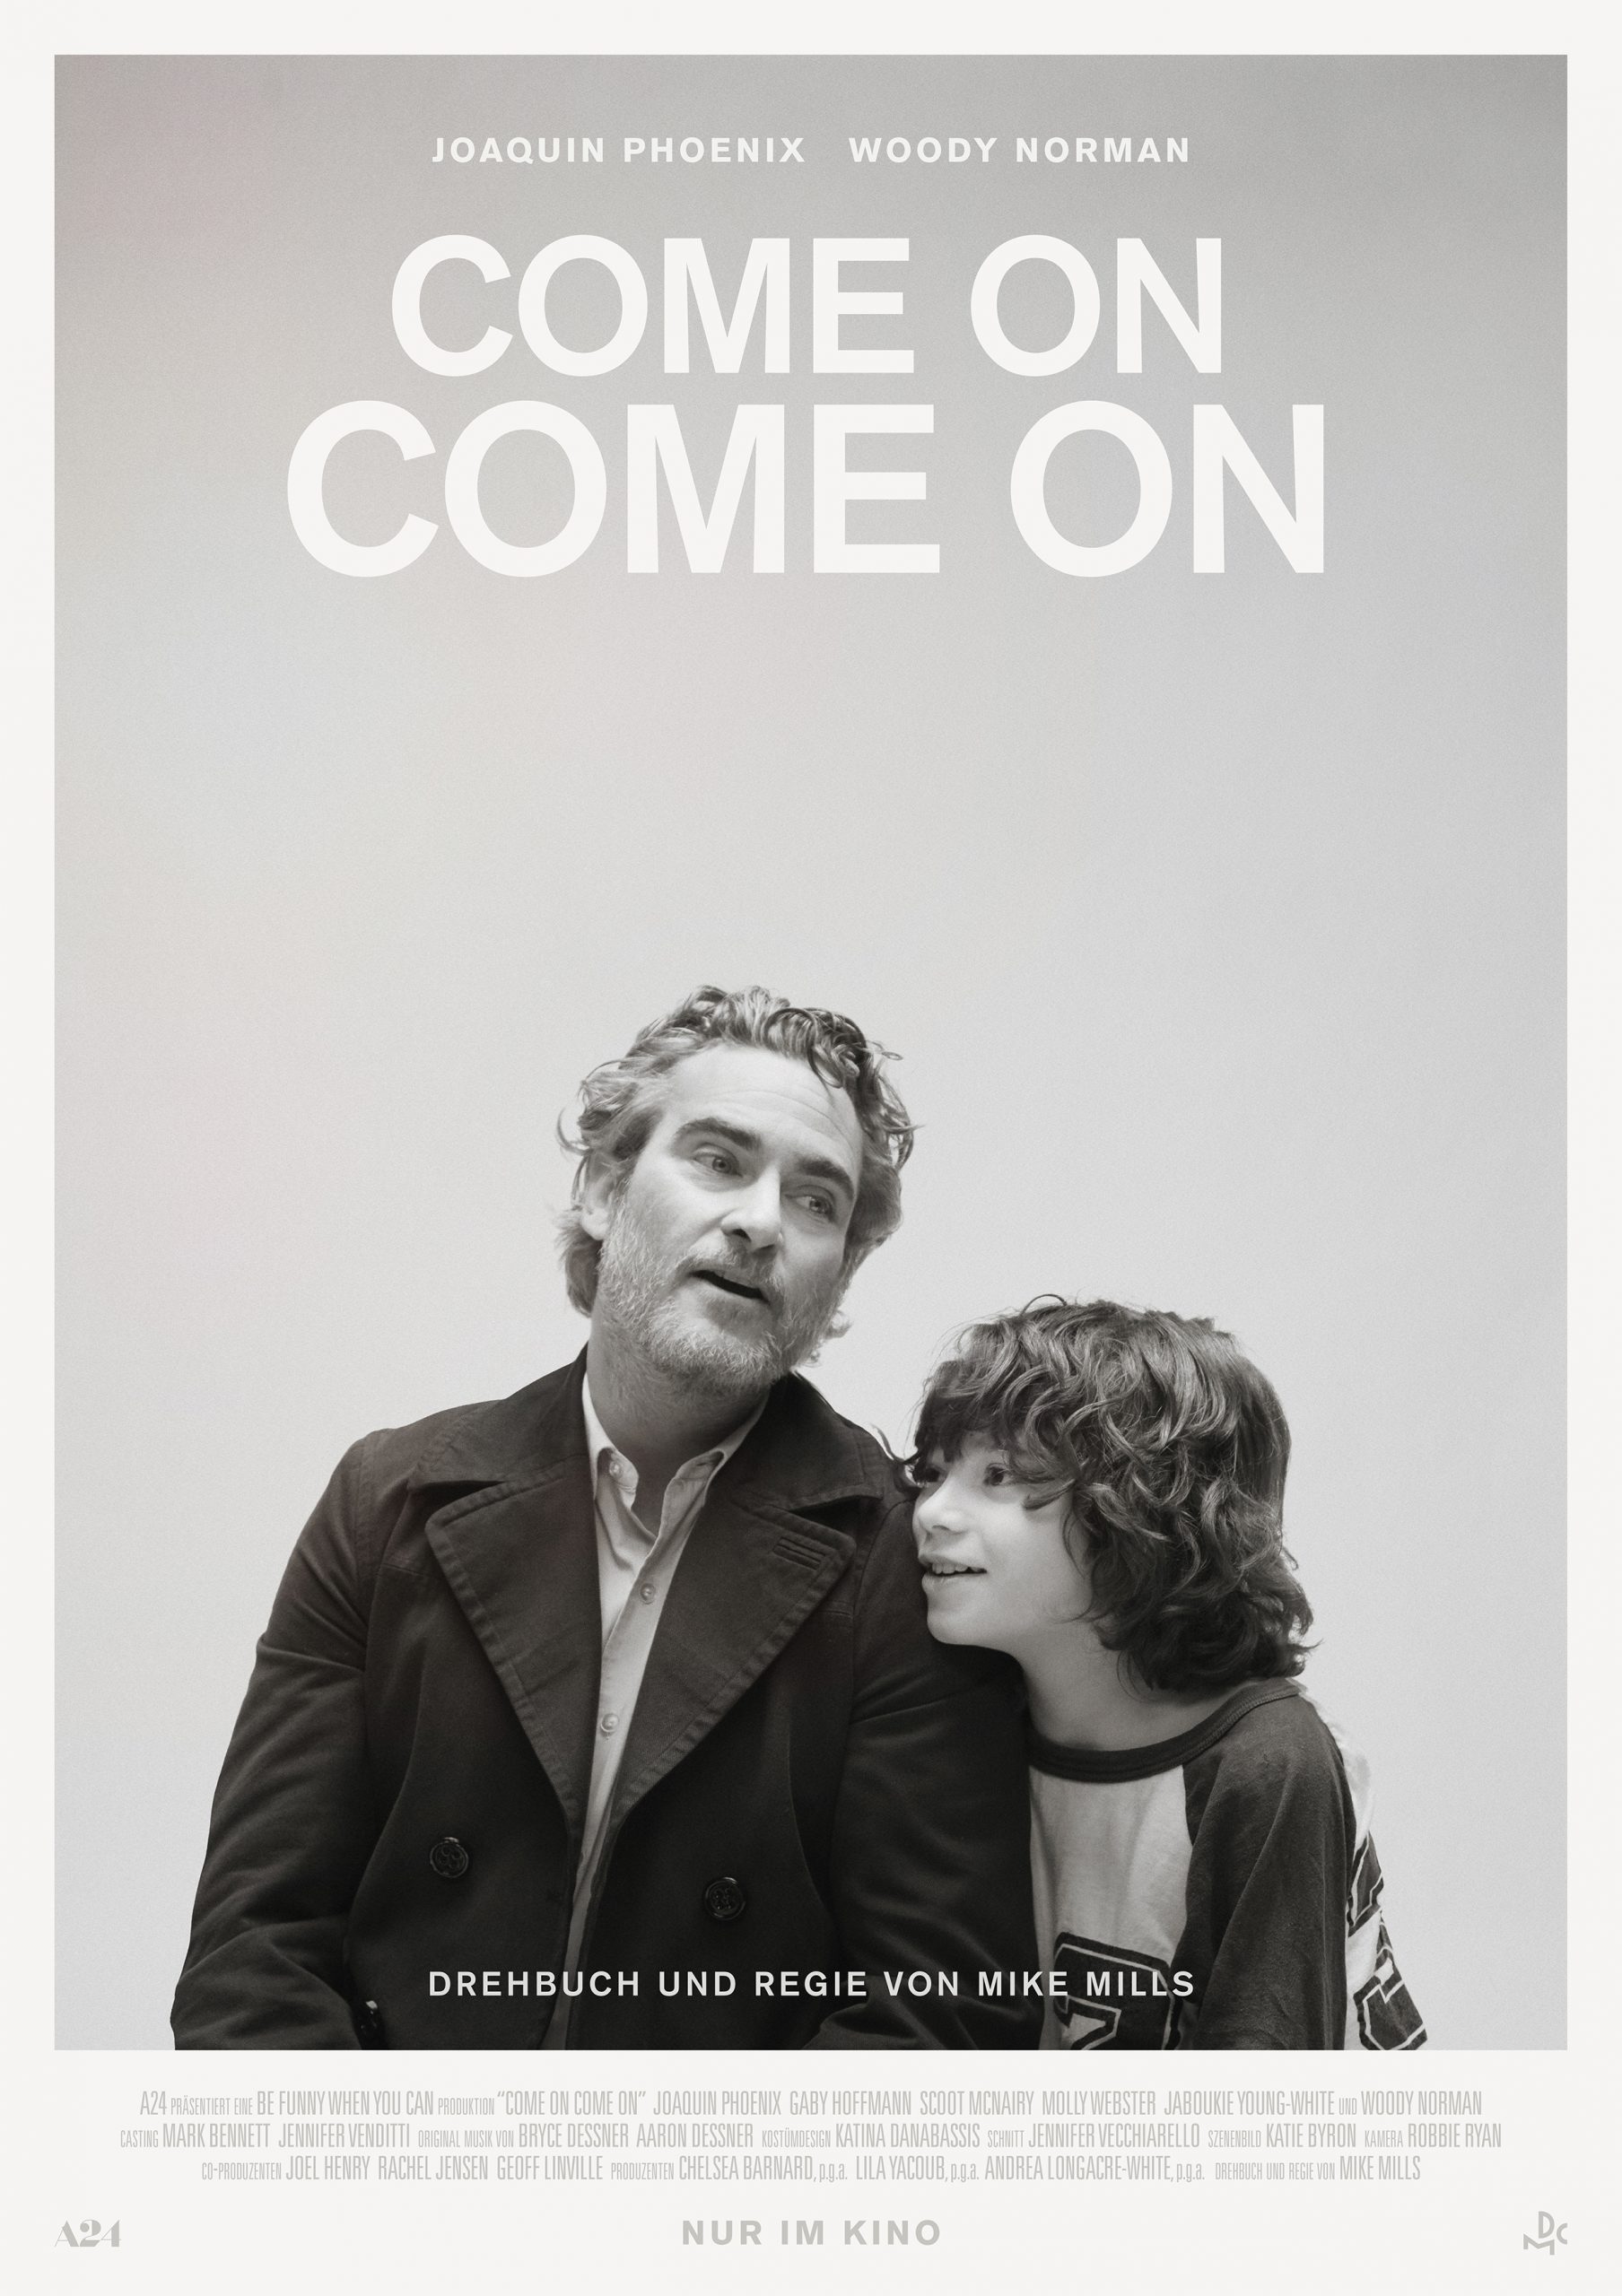 ‚Come on, come on‘ von Mike Mills